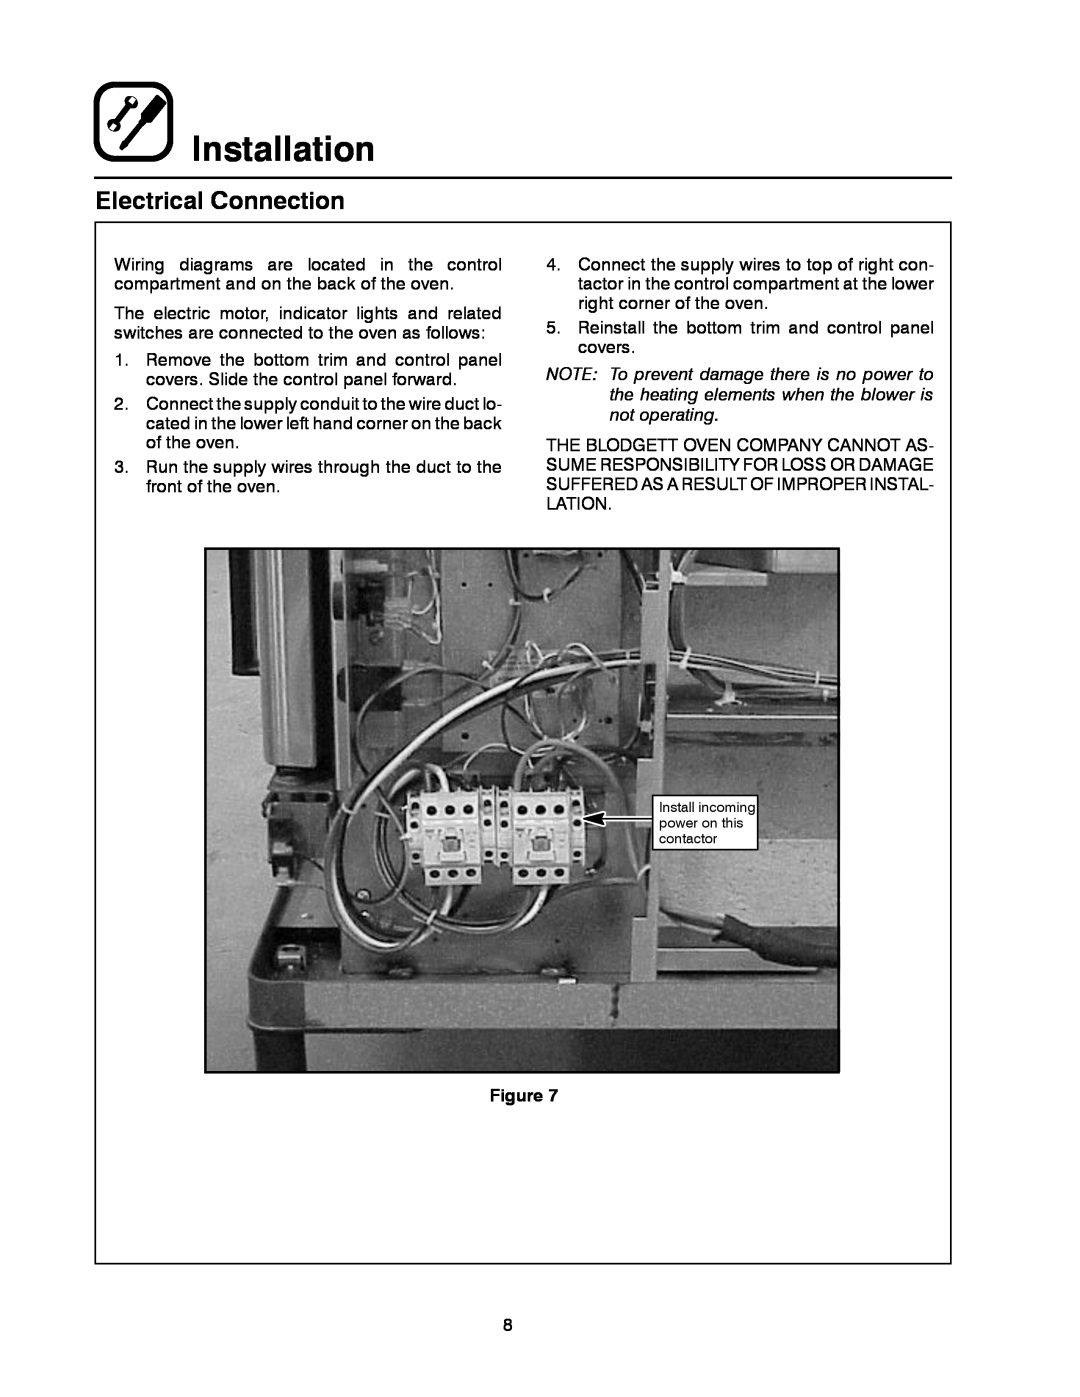 Blodgett MARK V XCEL CONVECTION OVEN manual Installation, Electrical Connection 